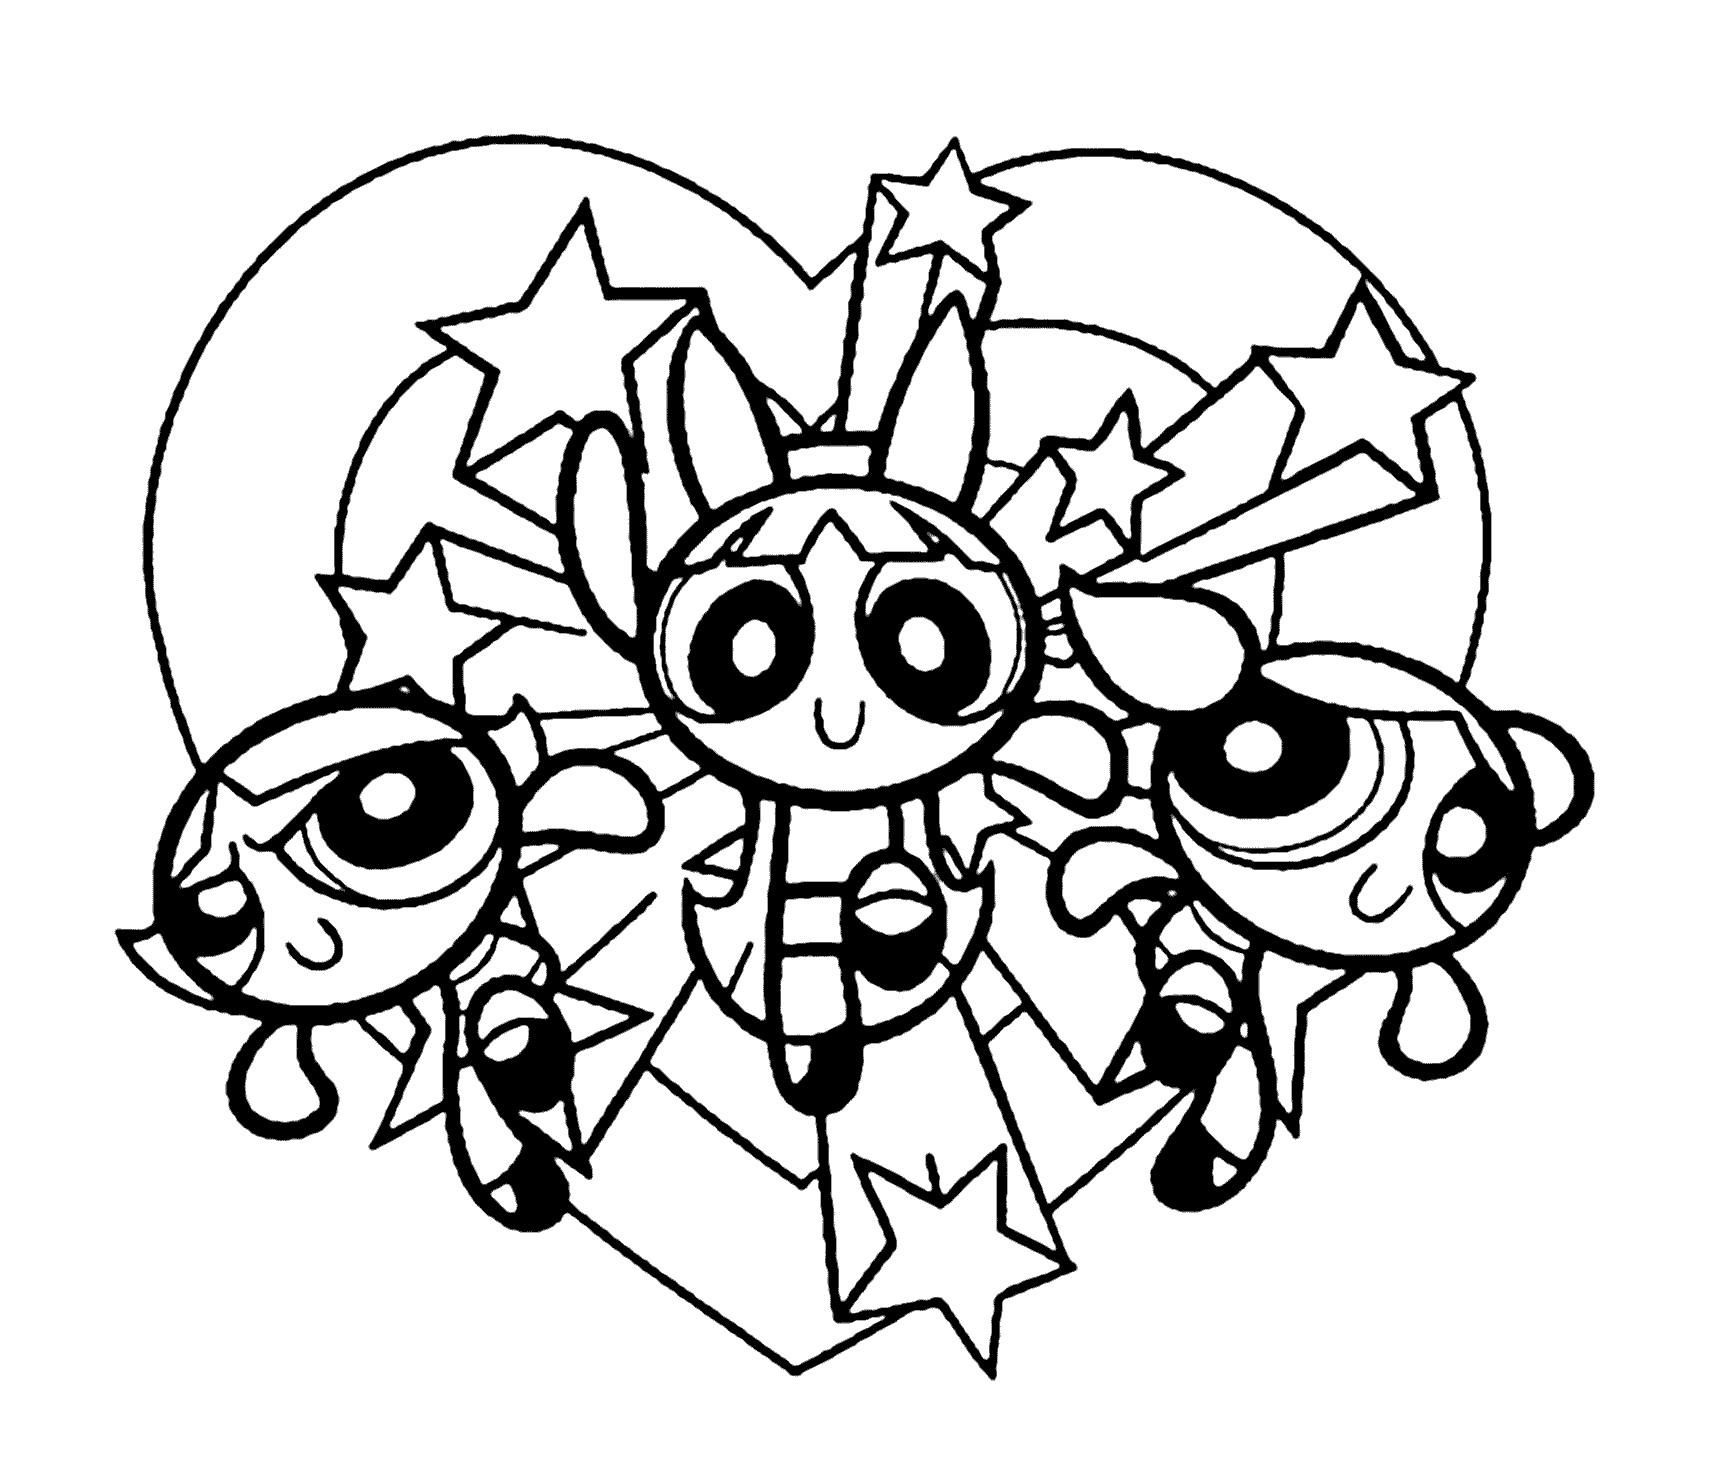 The Powerpuff Girls Coloring Pages
 Coloring Pages For Girls 9 10